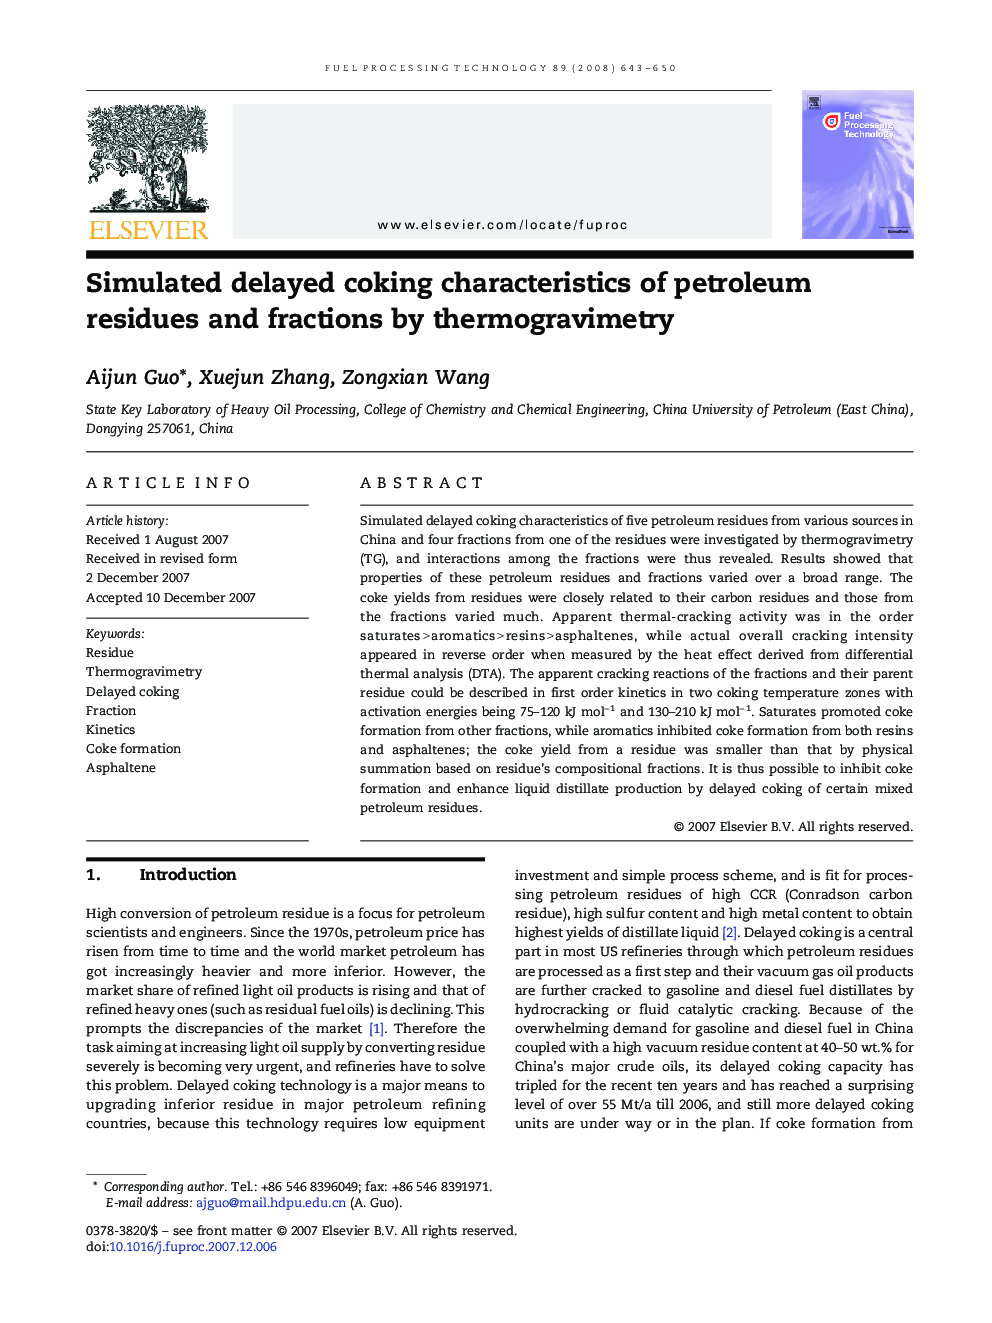 Simulated delayed coking characteristics of petroleum residues and fractions by thermogravimetry